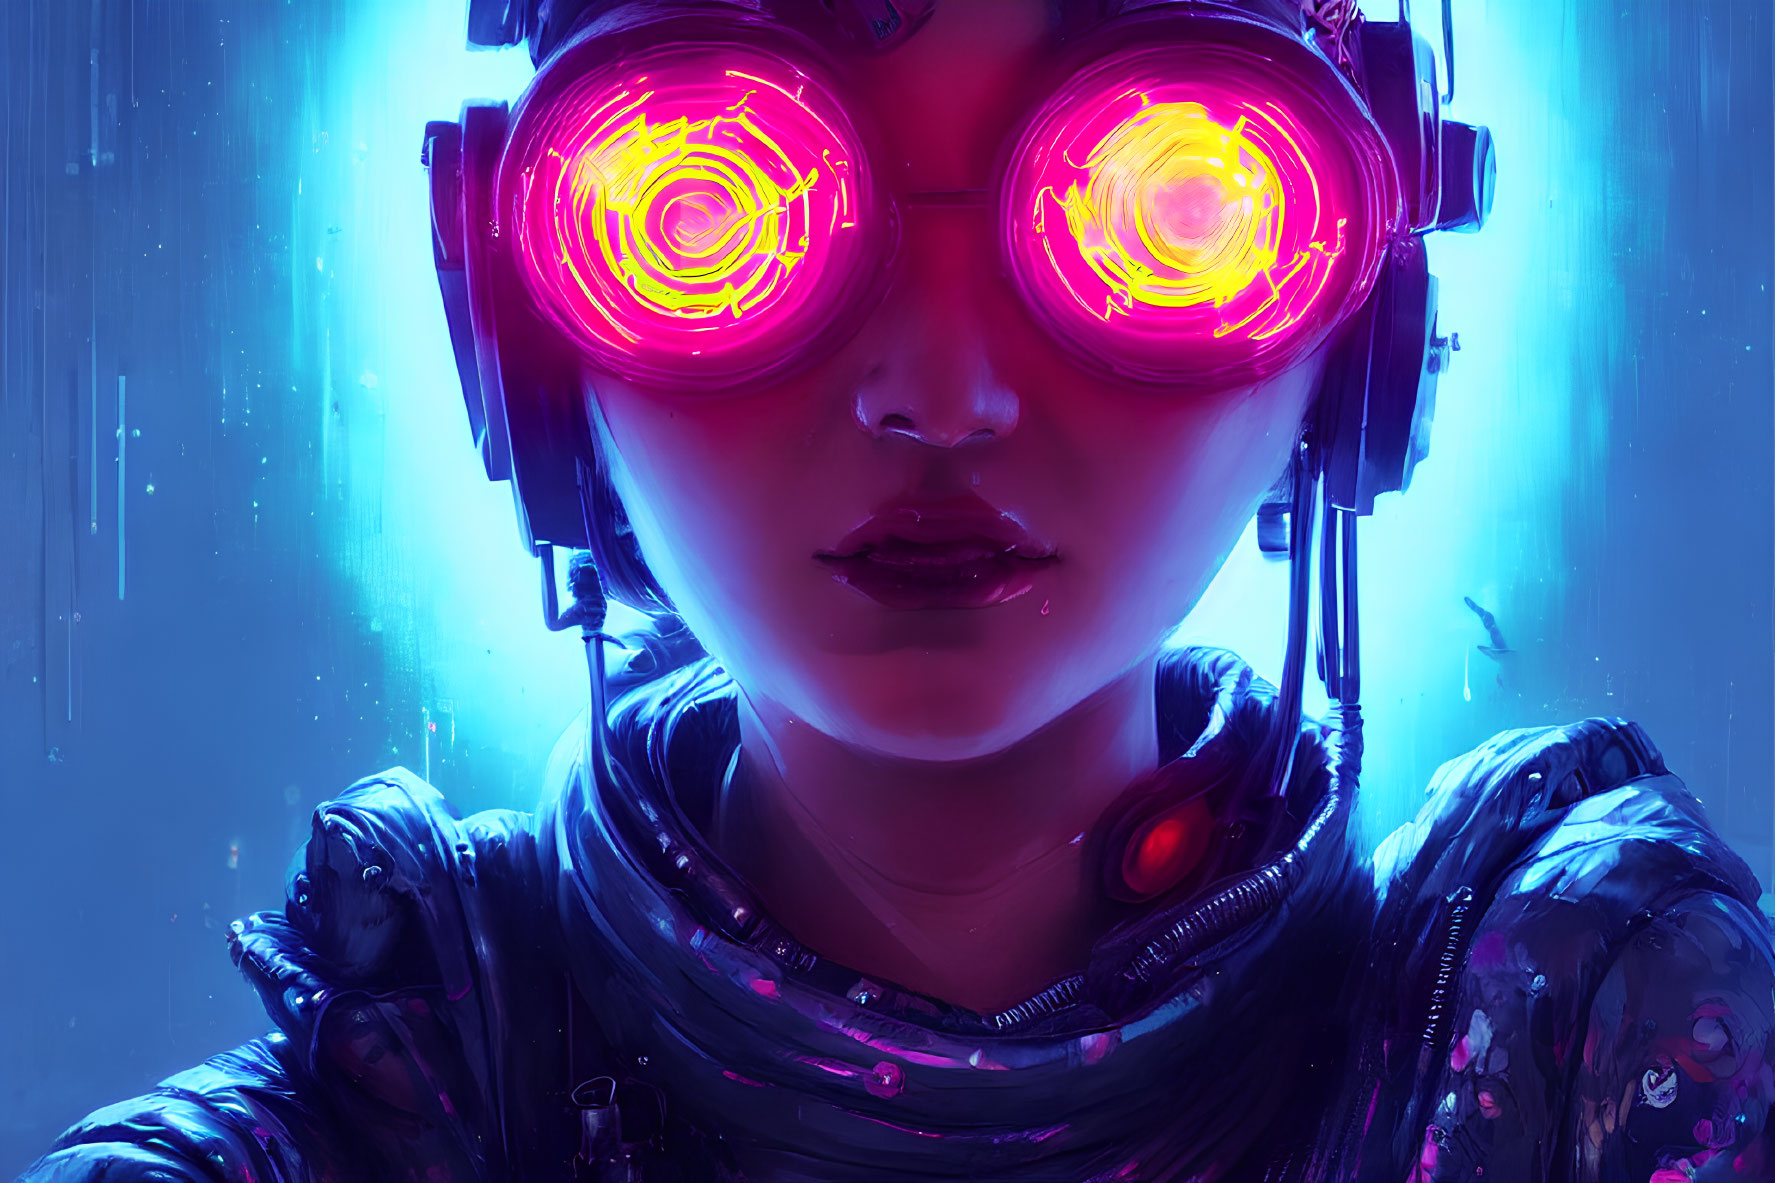 Person with glowing spiral eyes in futuristic headset and suit on blue neon-lit background